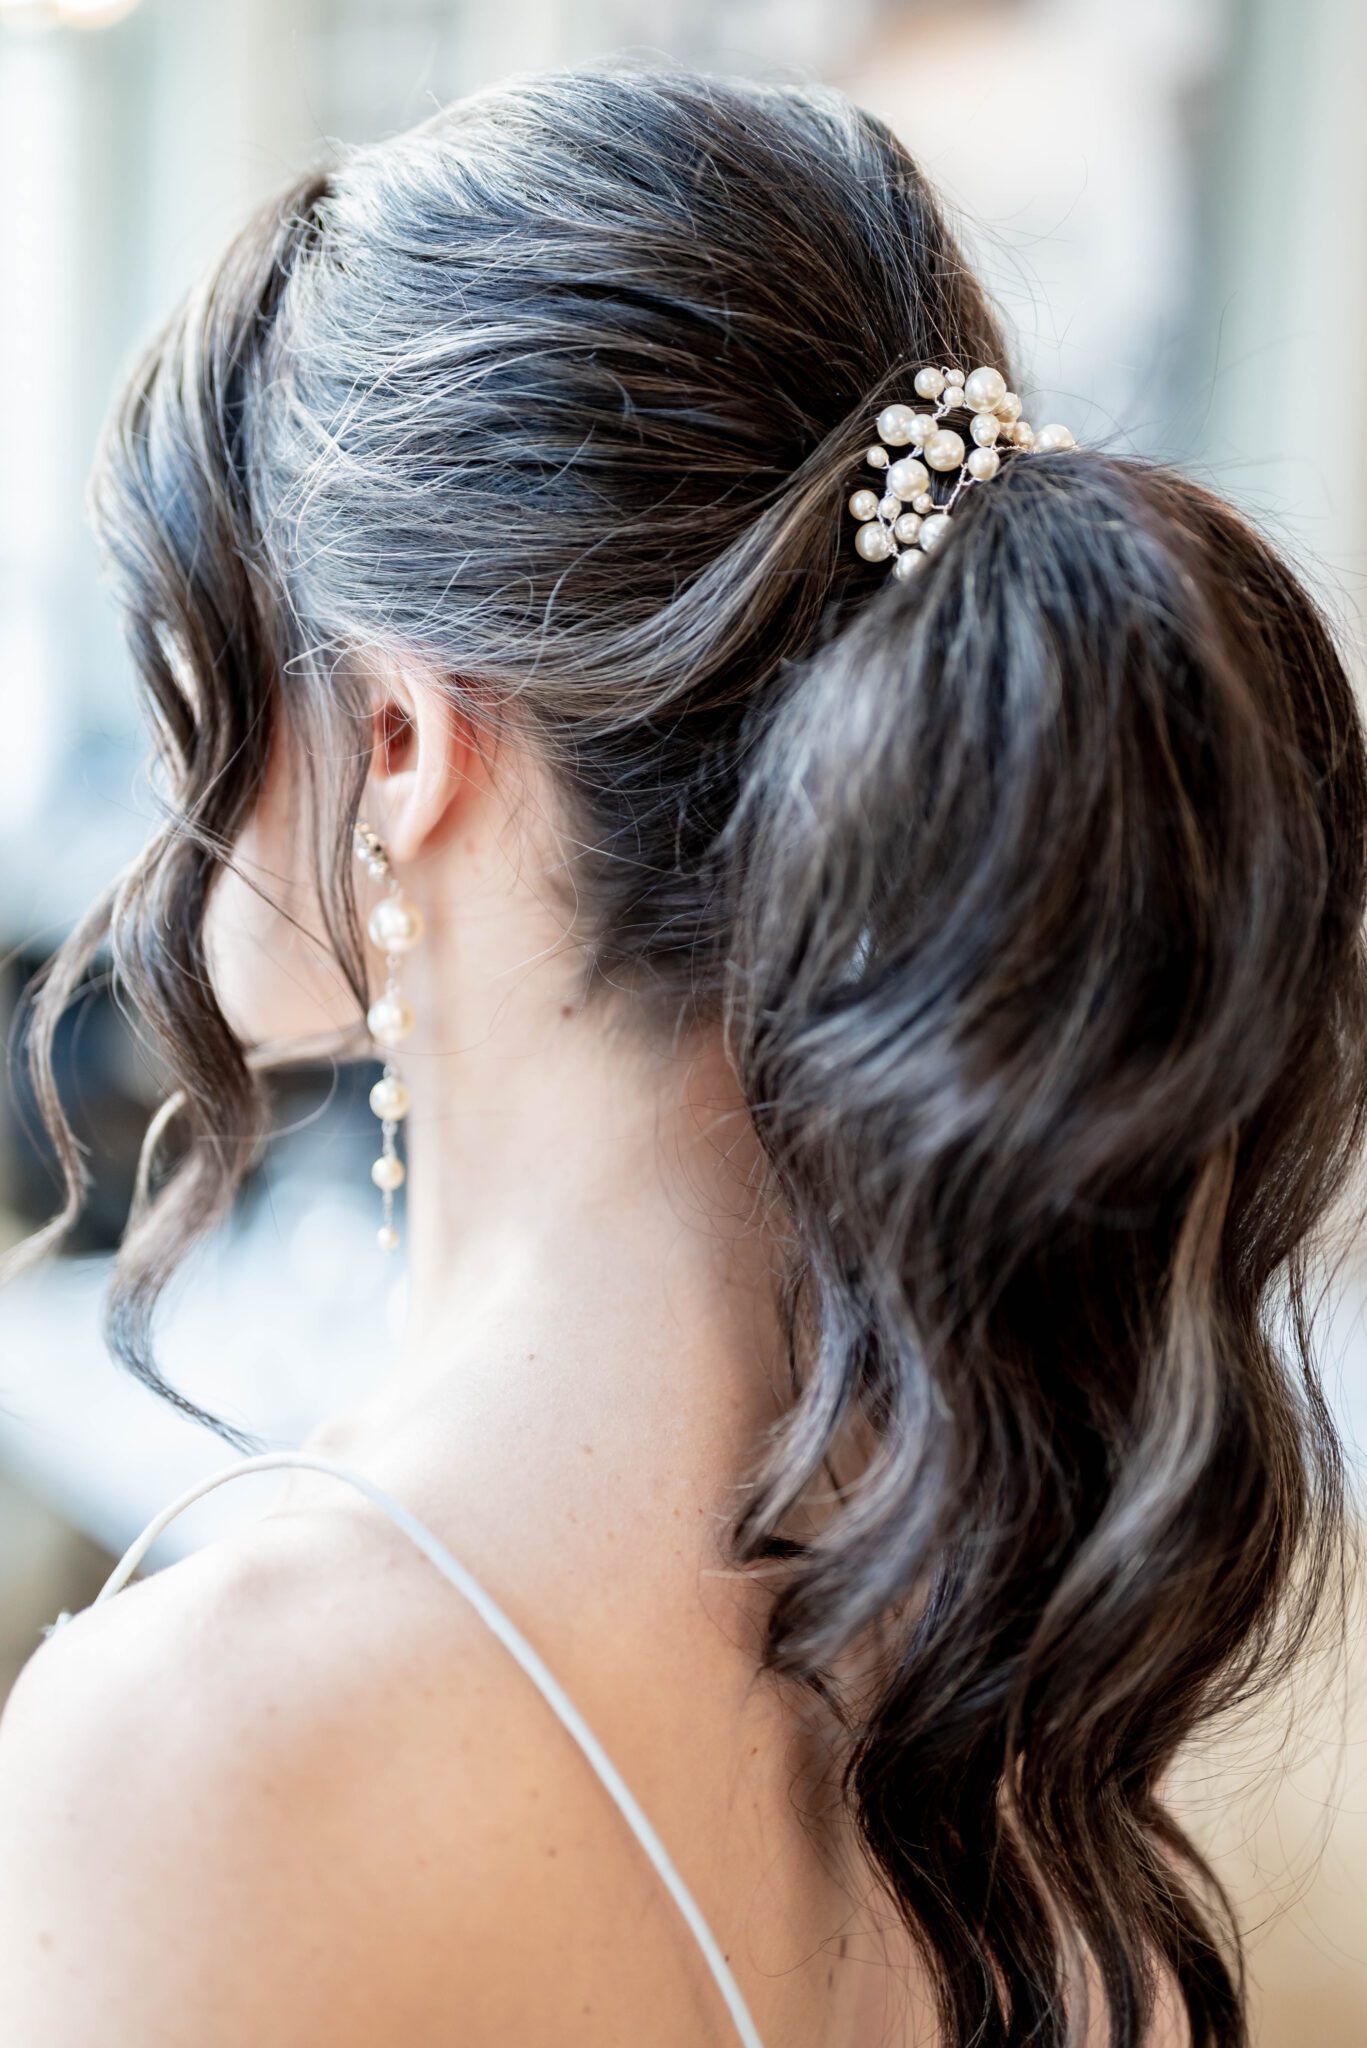 Bridal ponytail hairstyle with pearl hair piece, bridal portrait featuring ponytail hairstyle by Sweet Sage Bridal Services